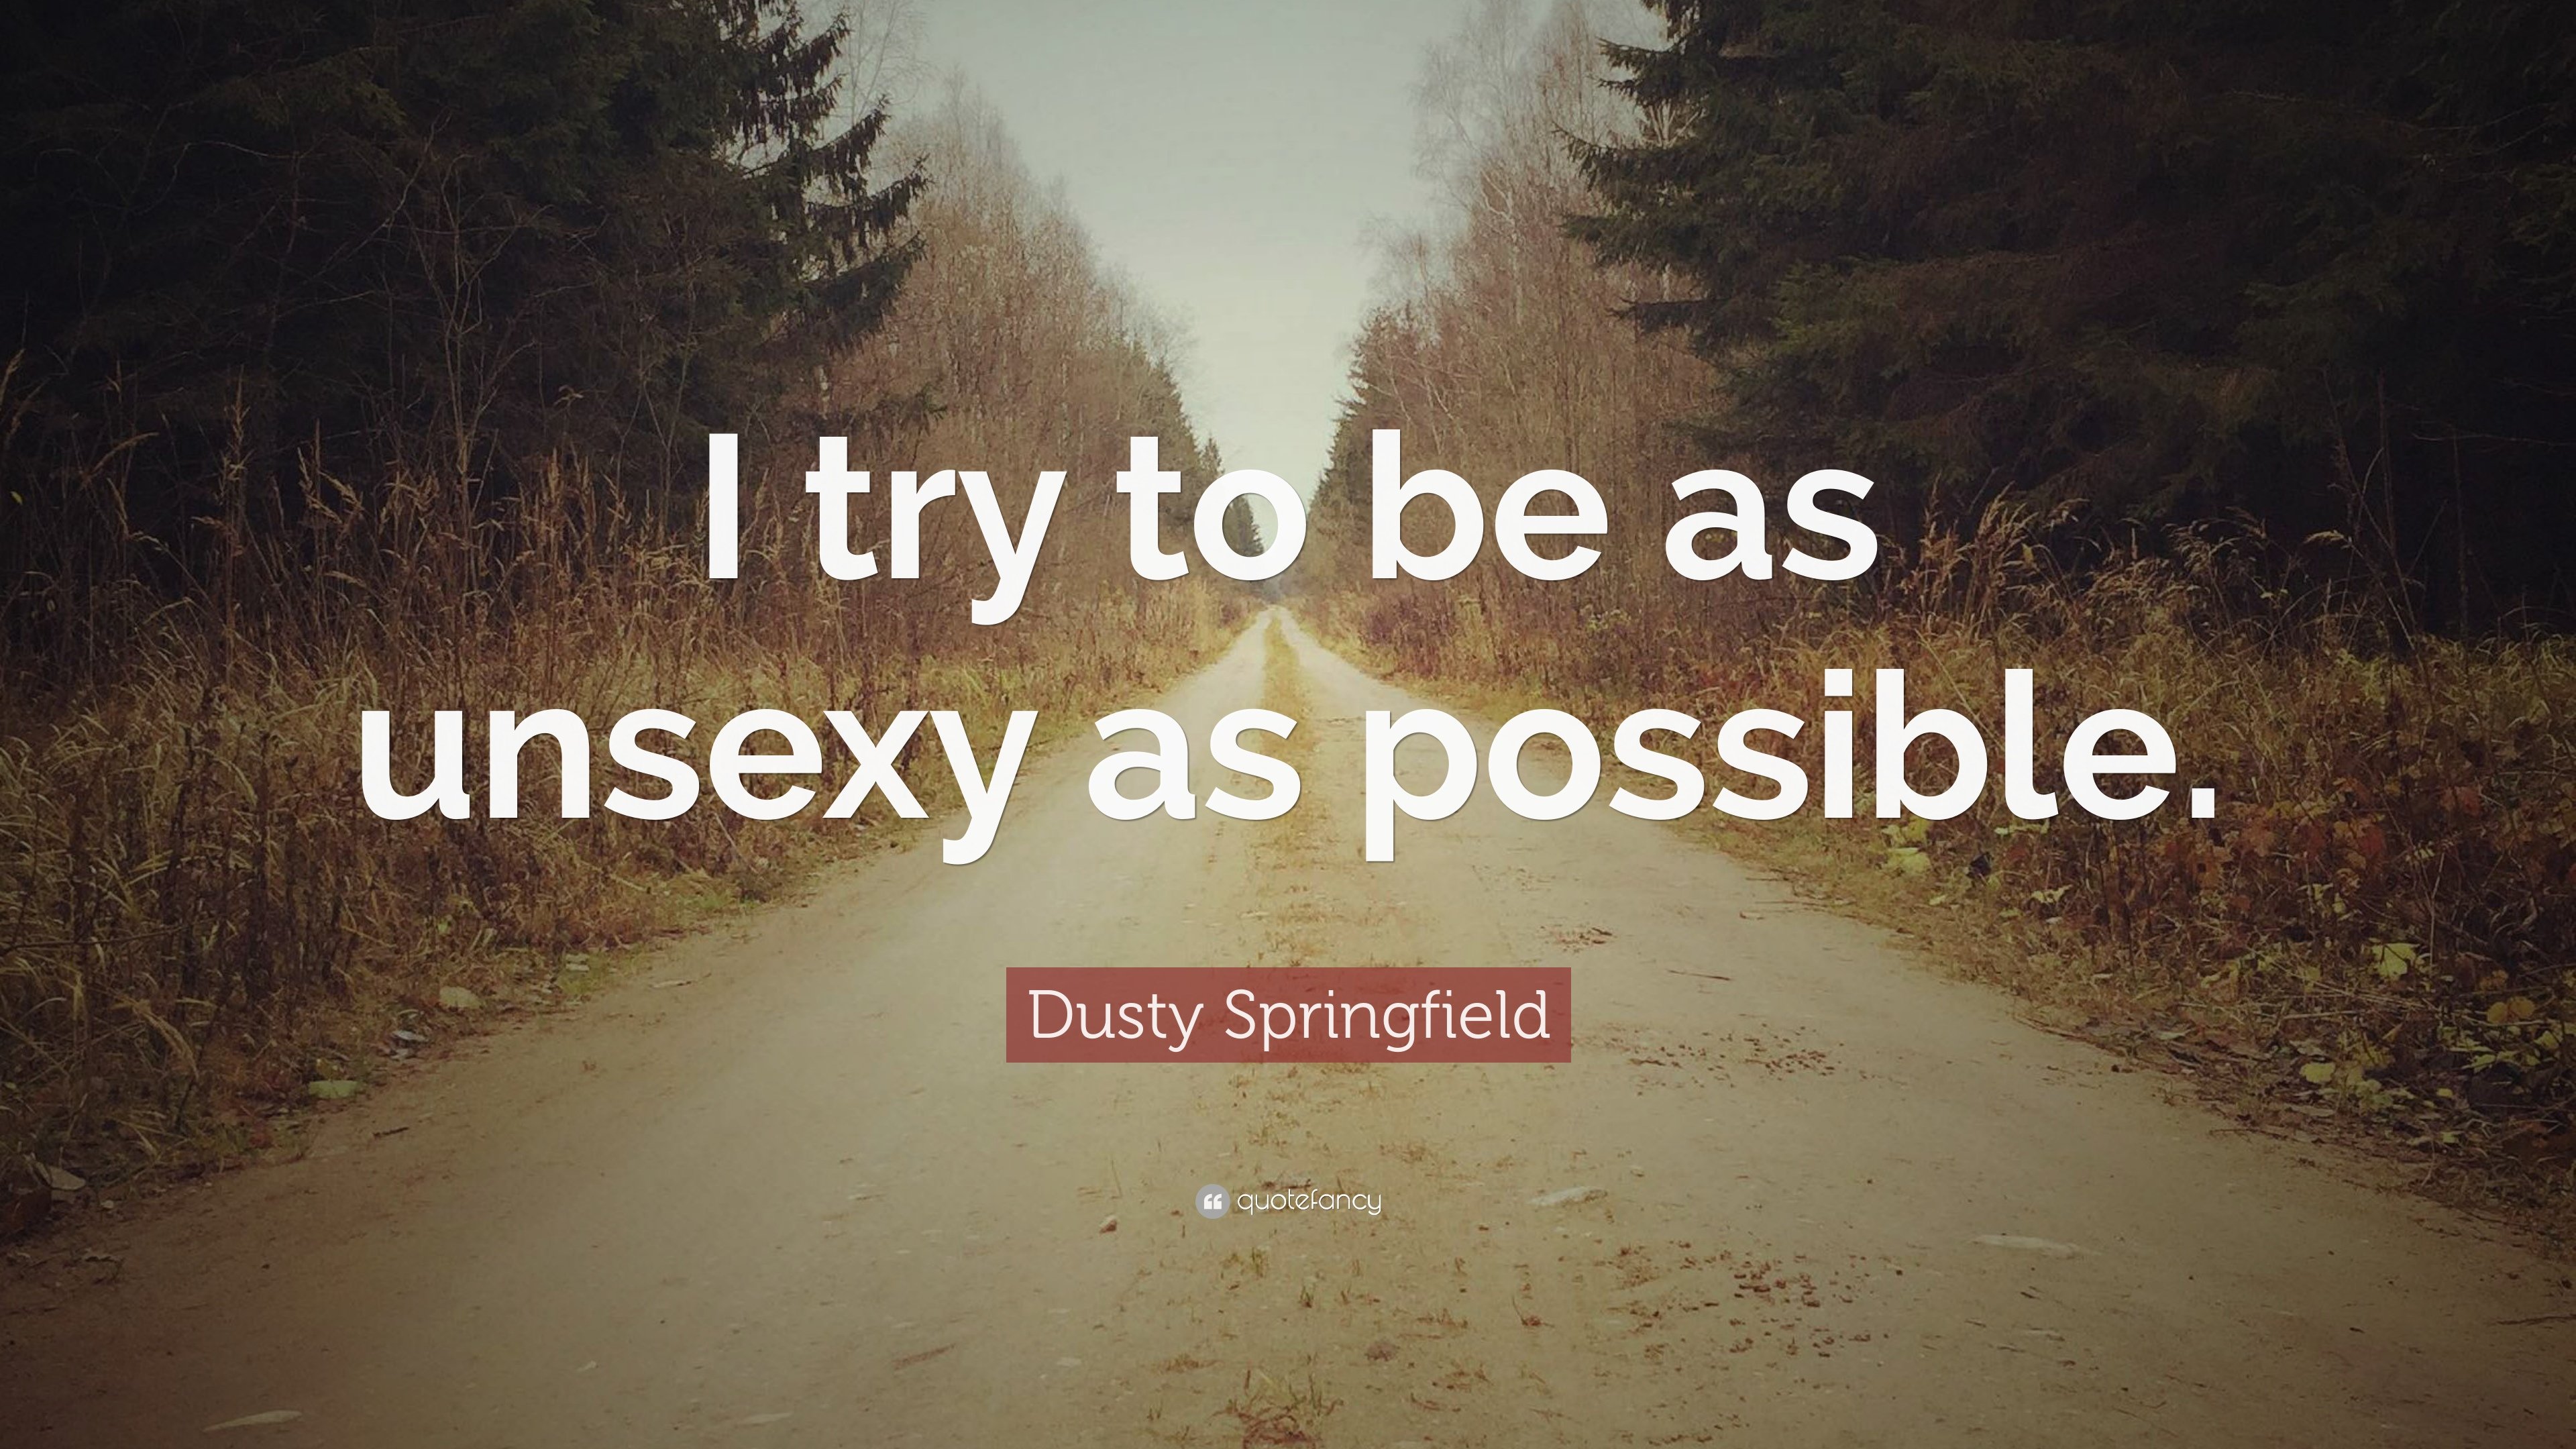 Dusty Springfield Quote: “I try to be as unas possible.” 7